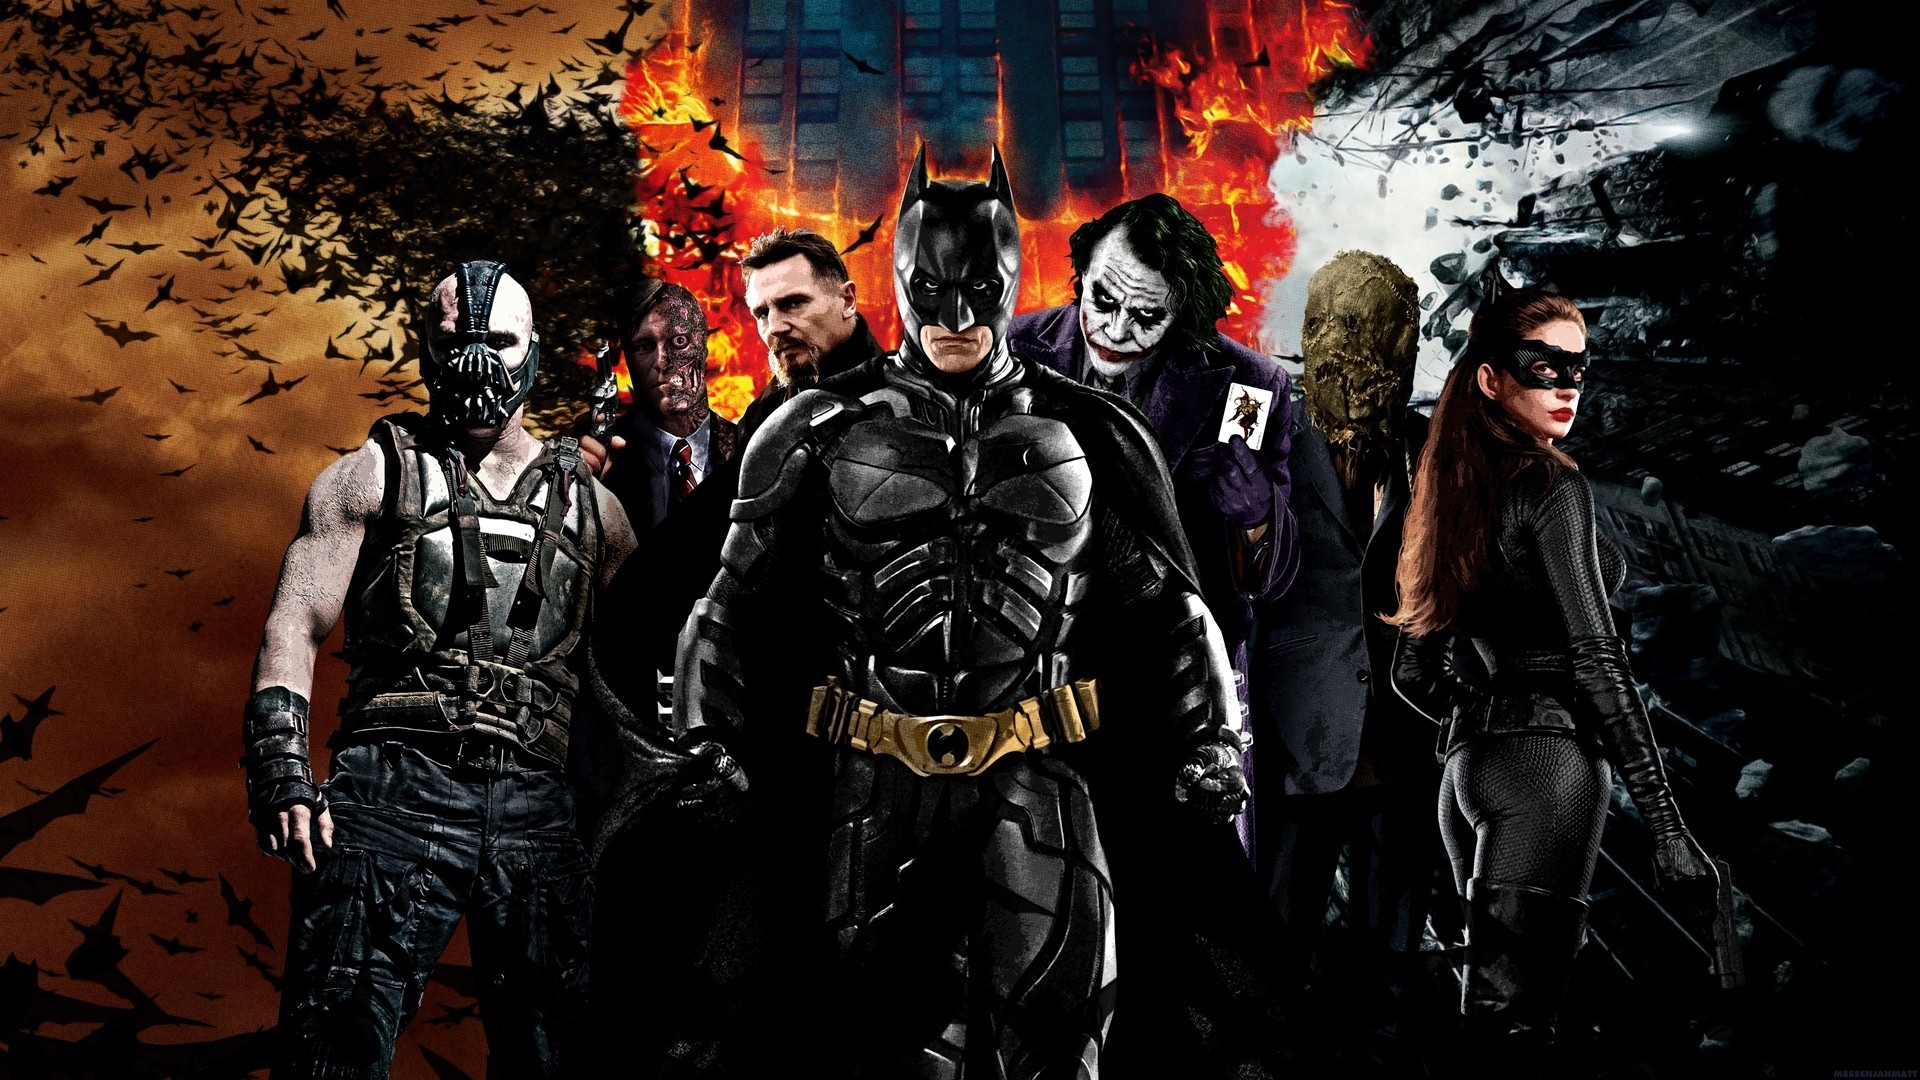 The Dark Knight Characters for 1920 x 1080 HDTV 1080p resolution